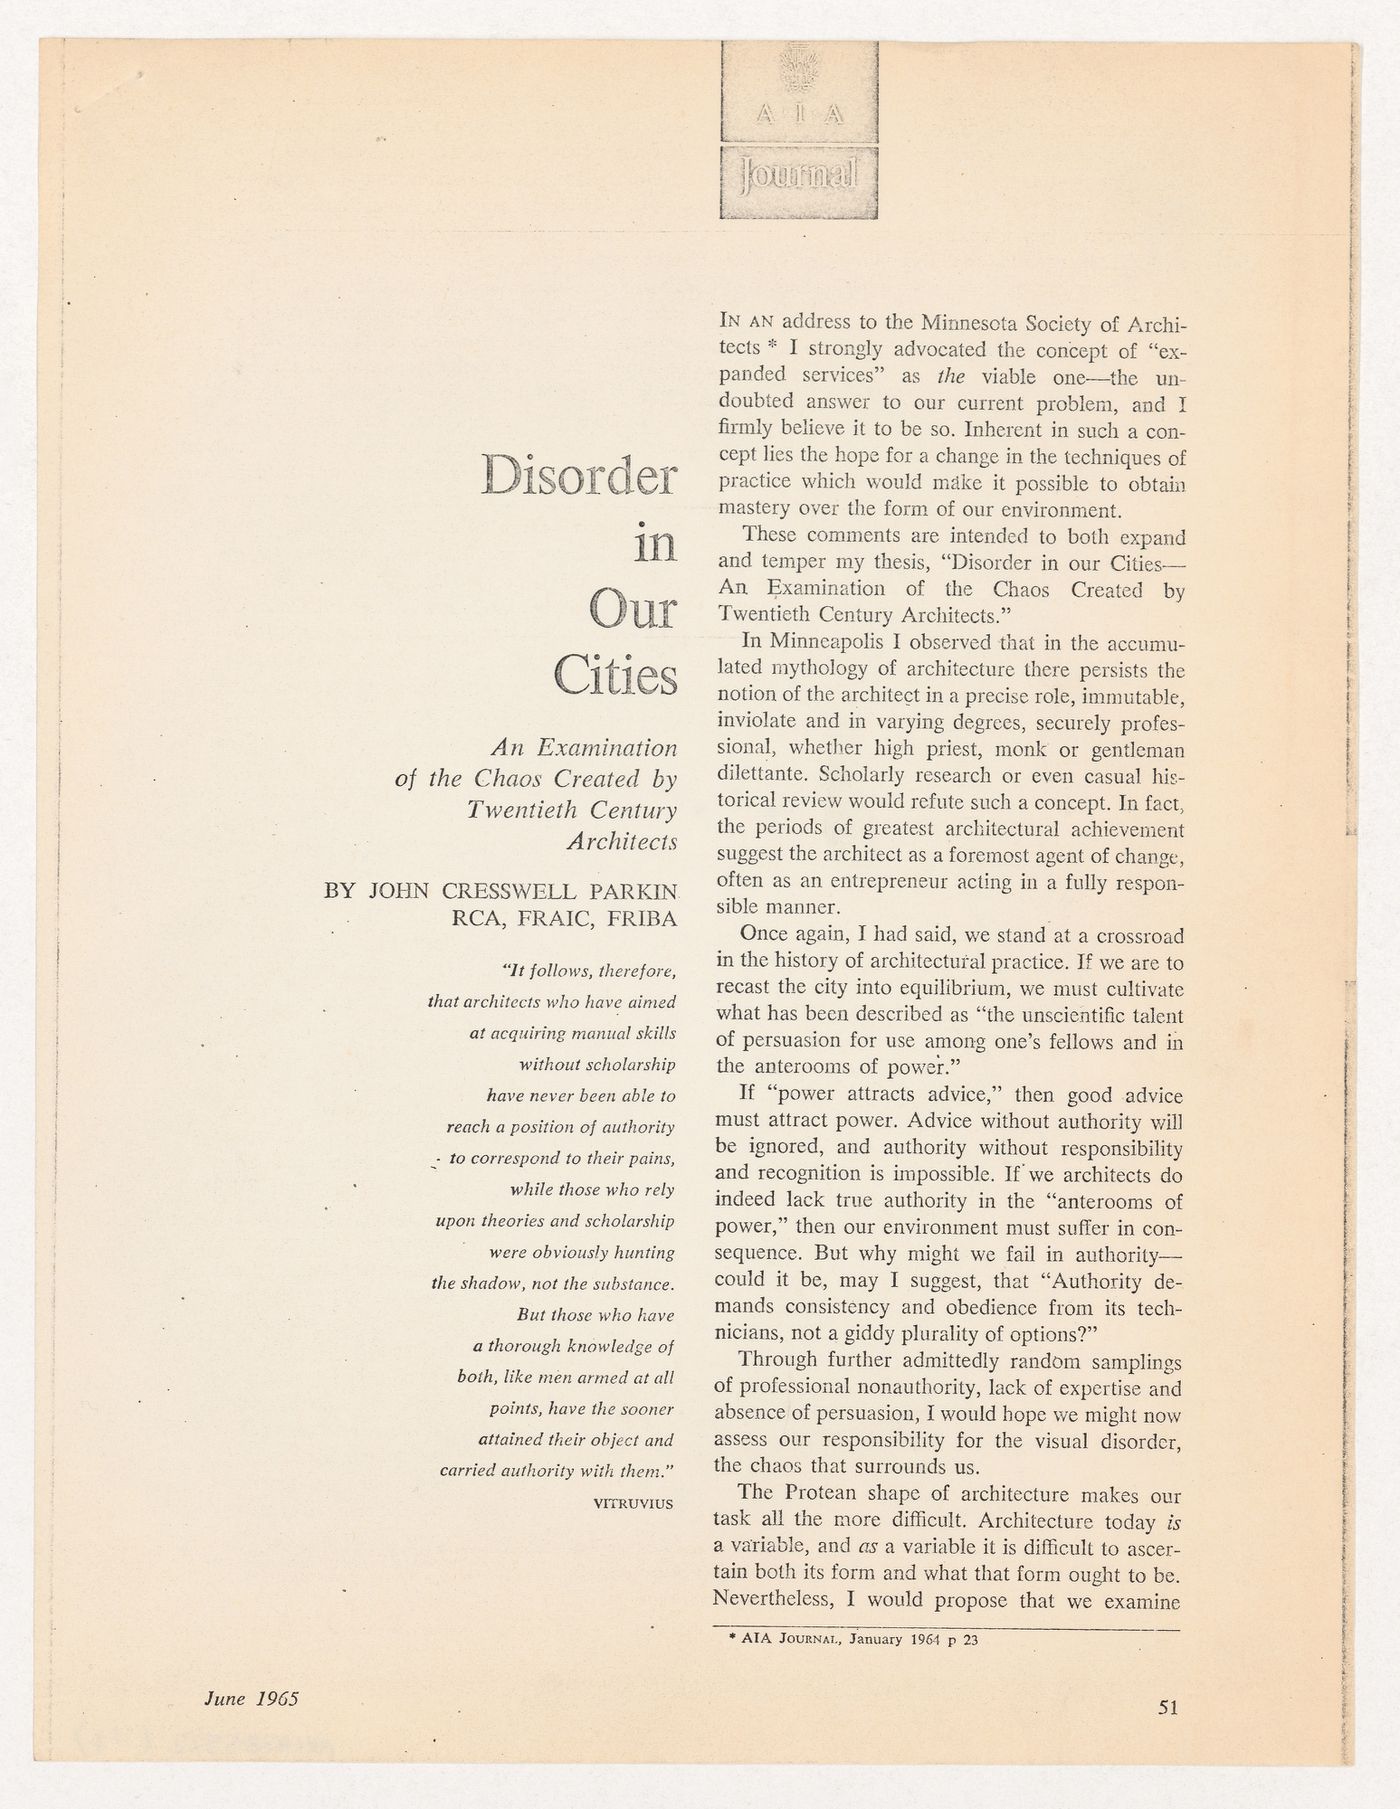 "Disorder in our Cities: An Examination of the Chaos Created by Twentieth Century Architects" published article by Parkin printed in the AIA Journal